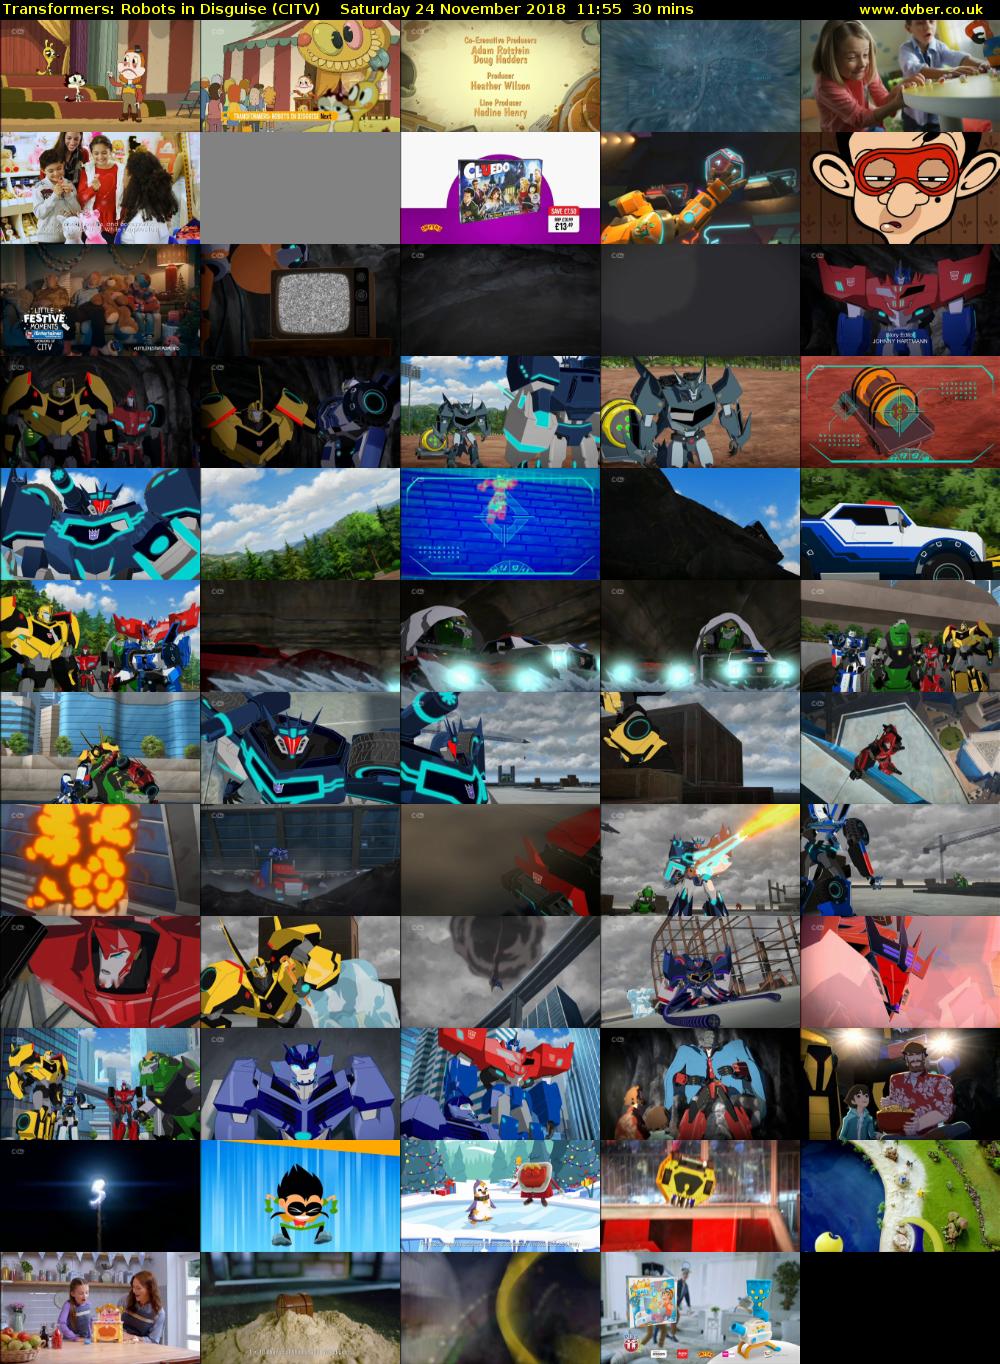 Transformers: Robots in Disguise (CITV) Saturday 24 November 2018 11:55 - 12:25